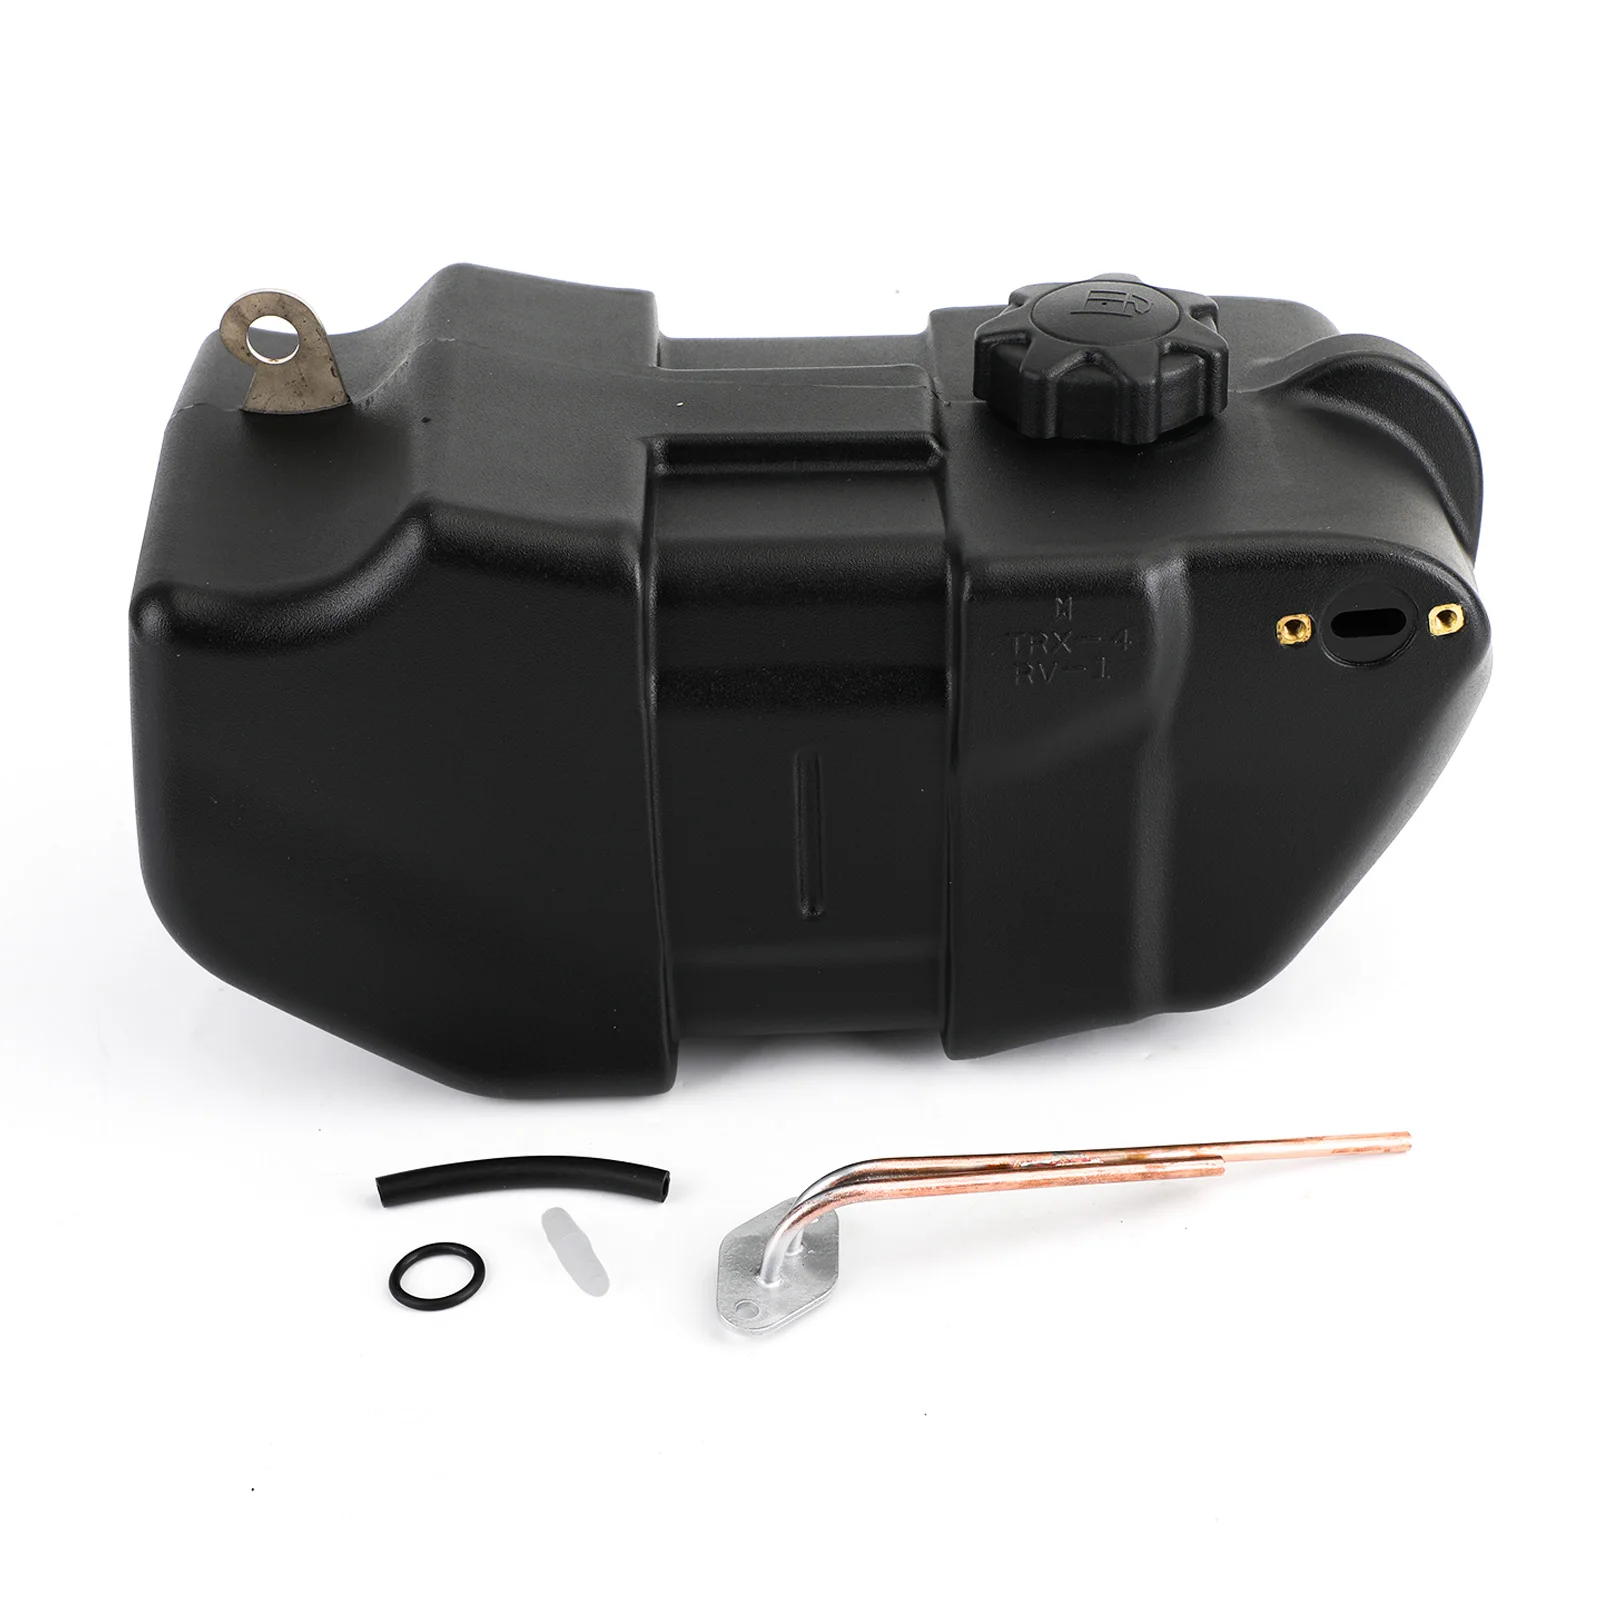 

Areyourshop Fuel Tank Gas Cover Petcock Kit Fit for Honda TRX350D FourTrax Foreman 1986 87 88 1989